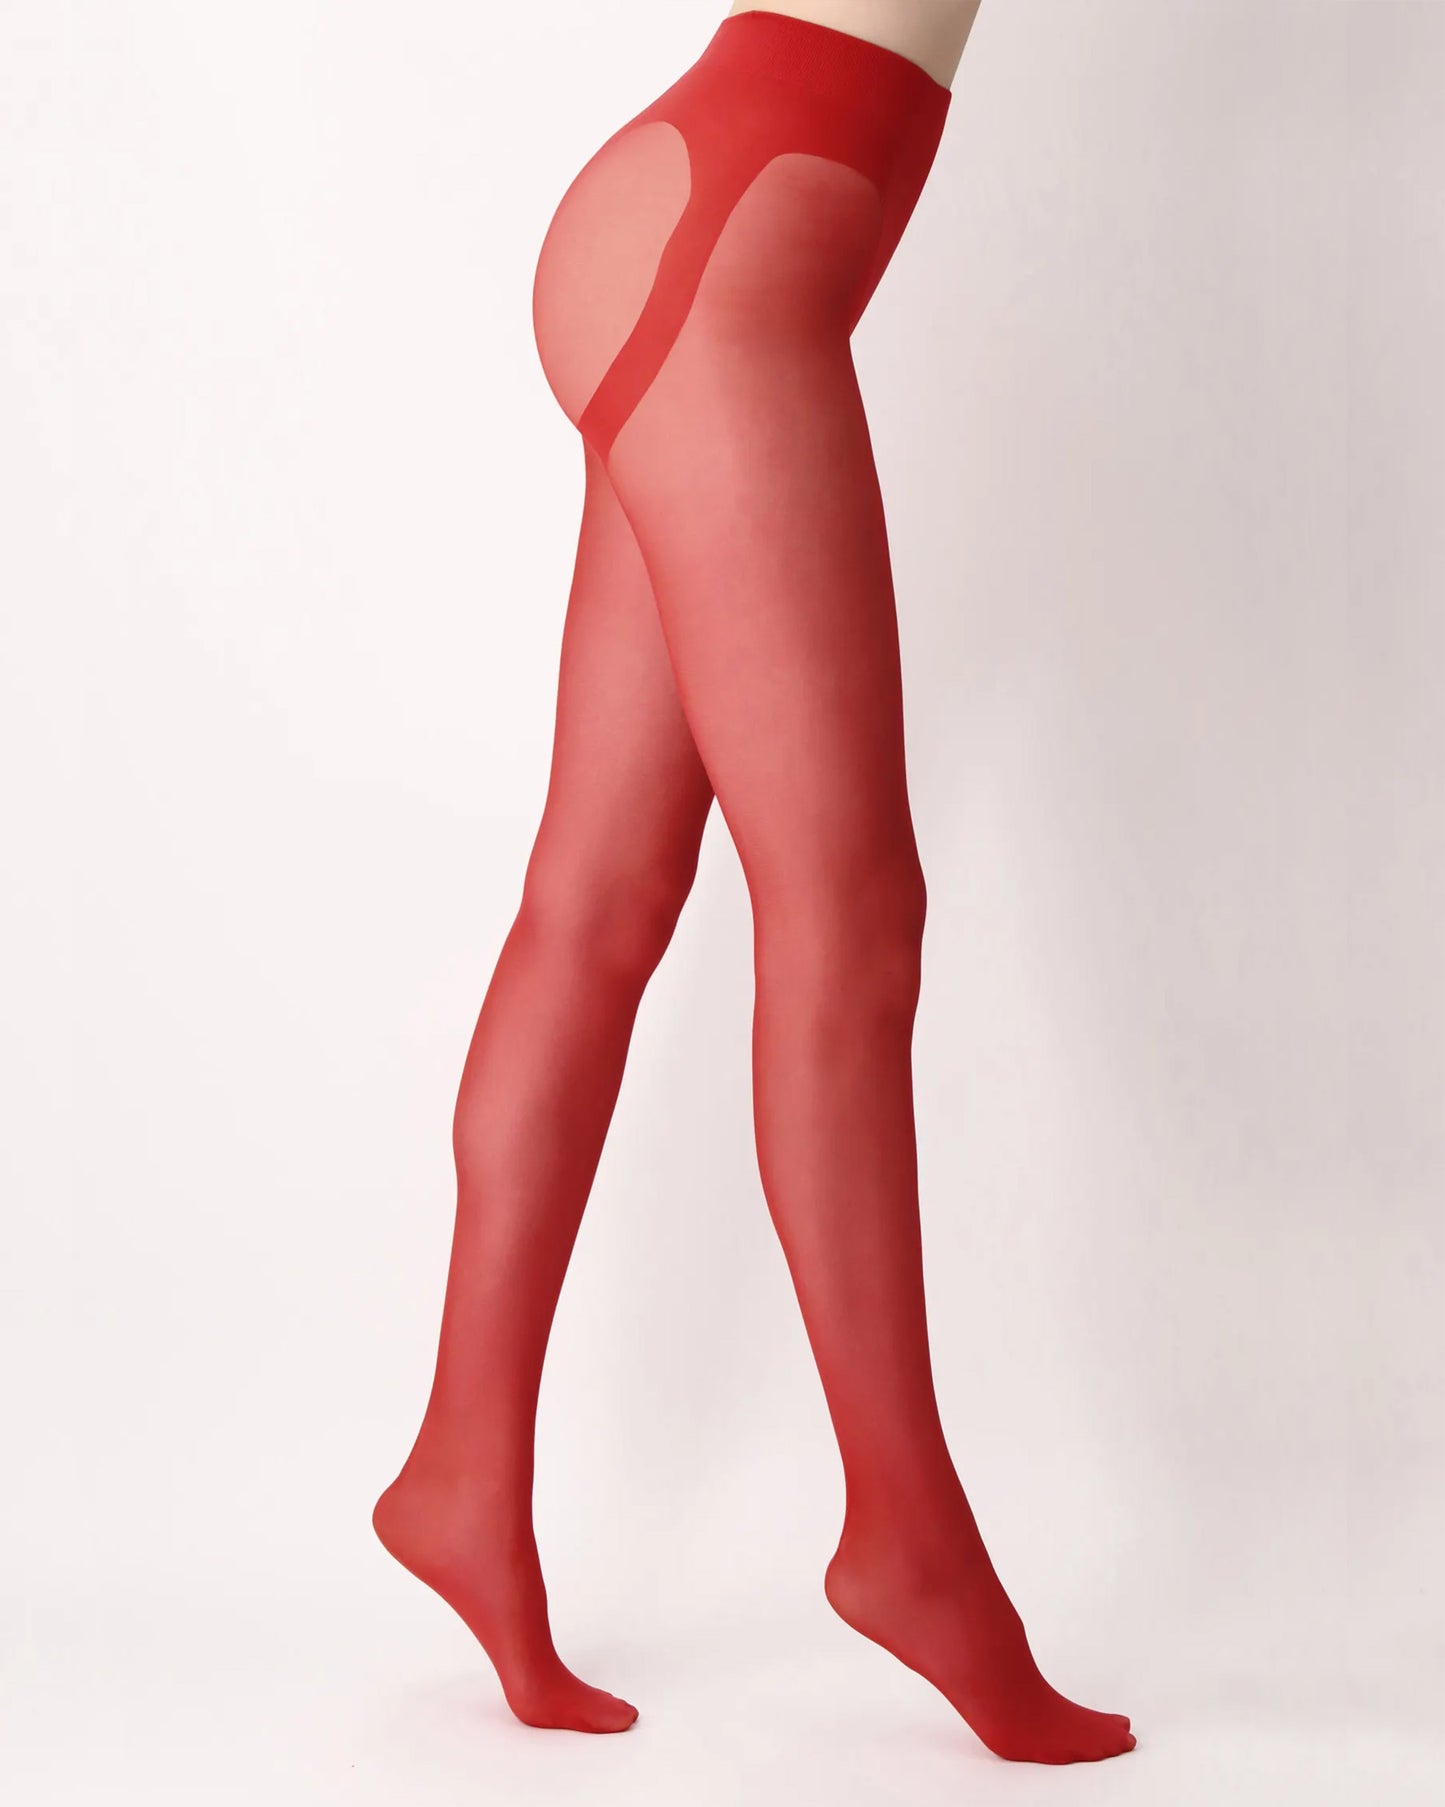 Oroblù Shock Up Line Tights - Sheer red tights with a back-seam, shaping push-up panty control-top